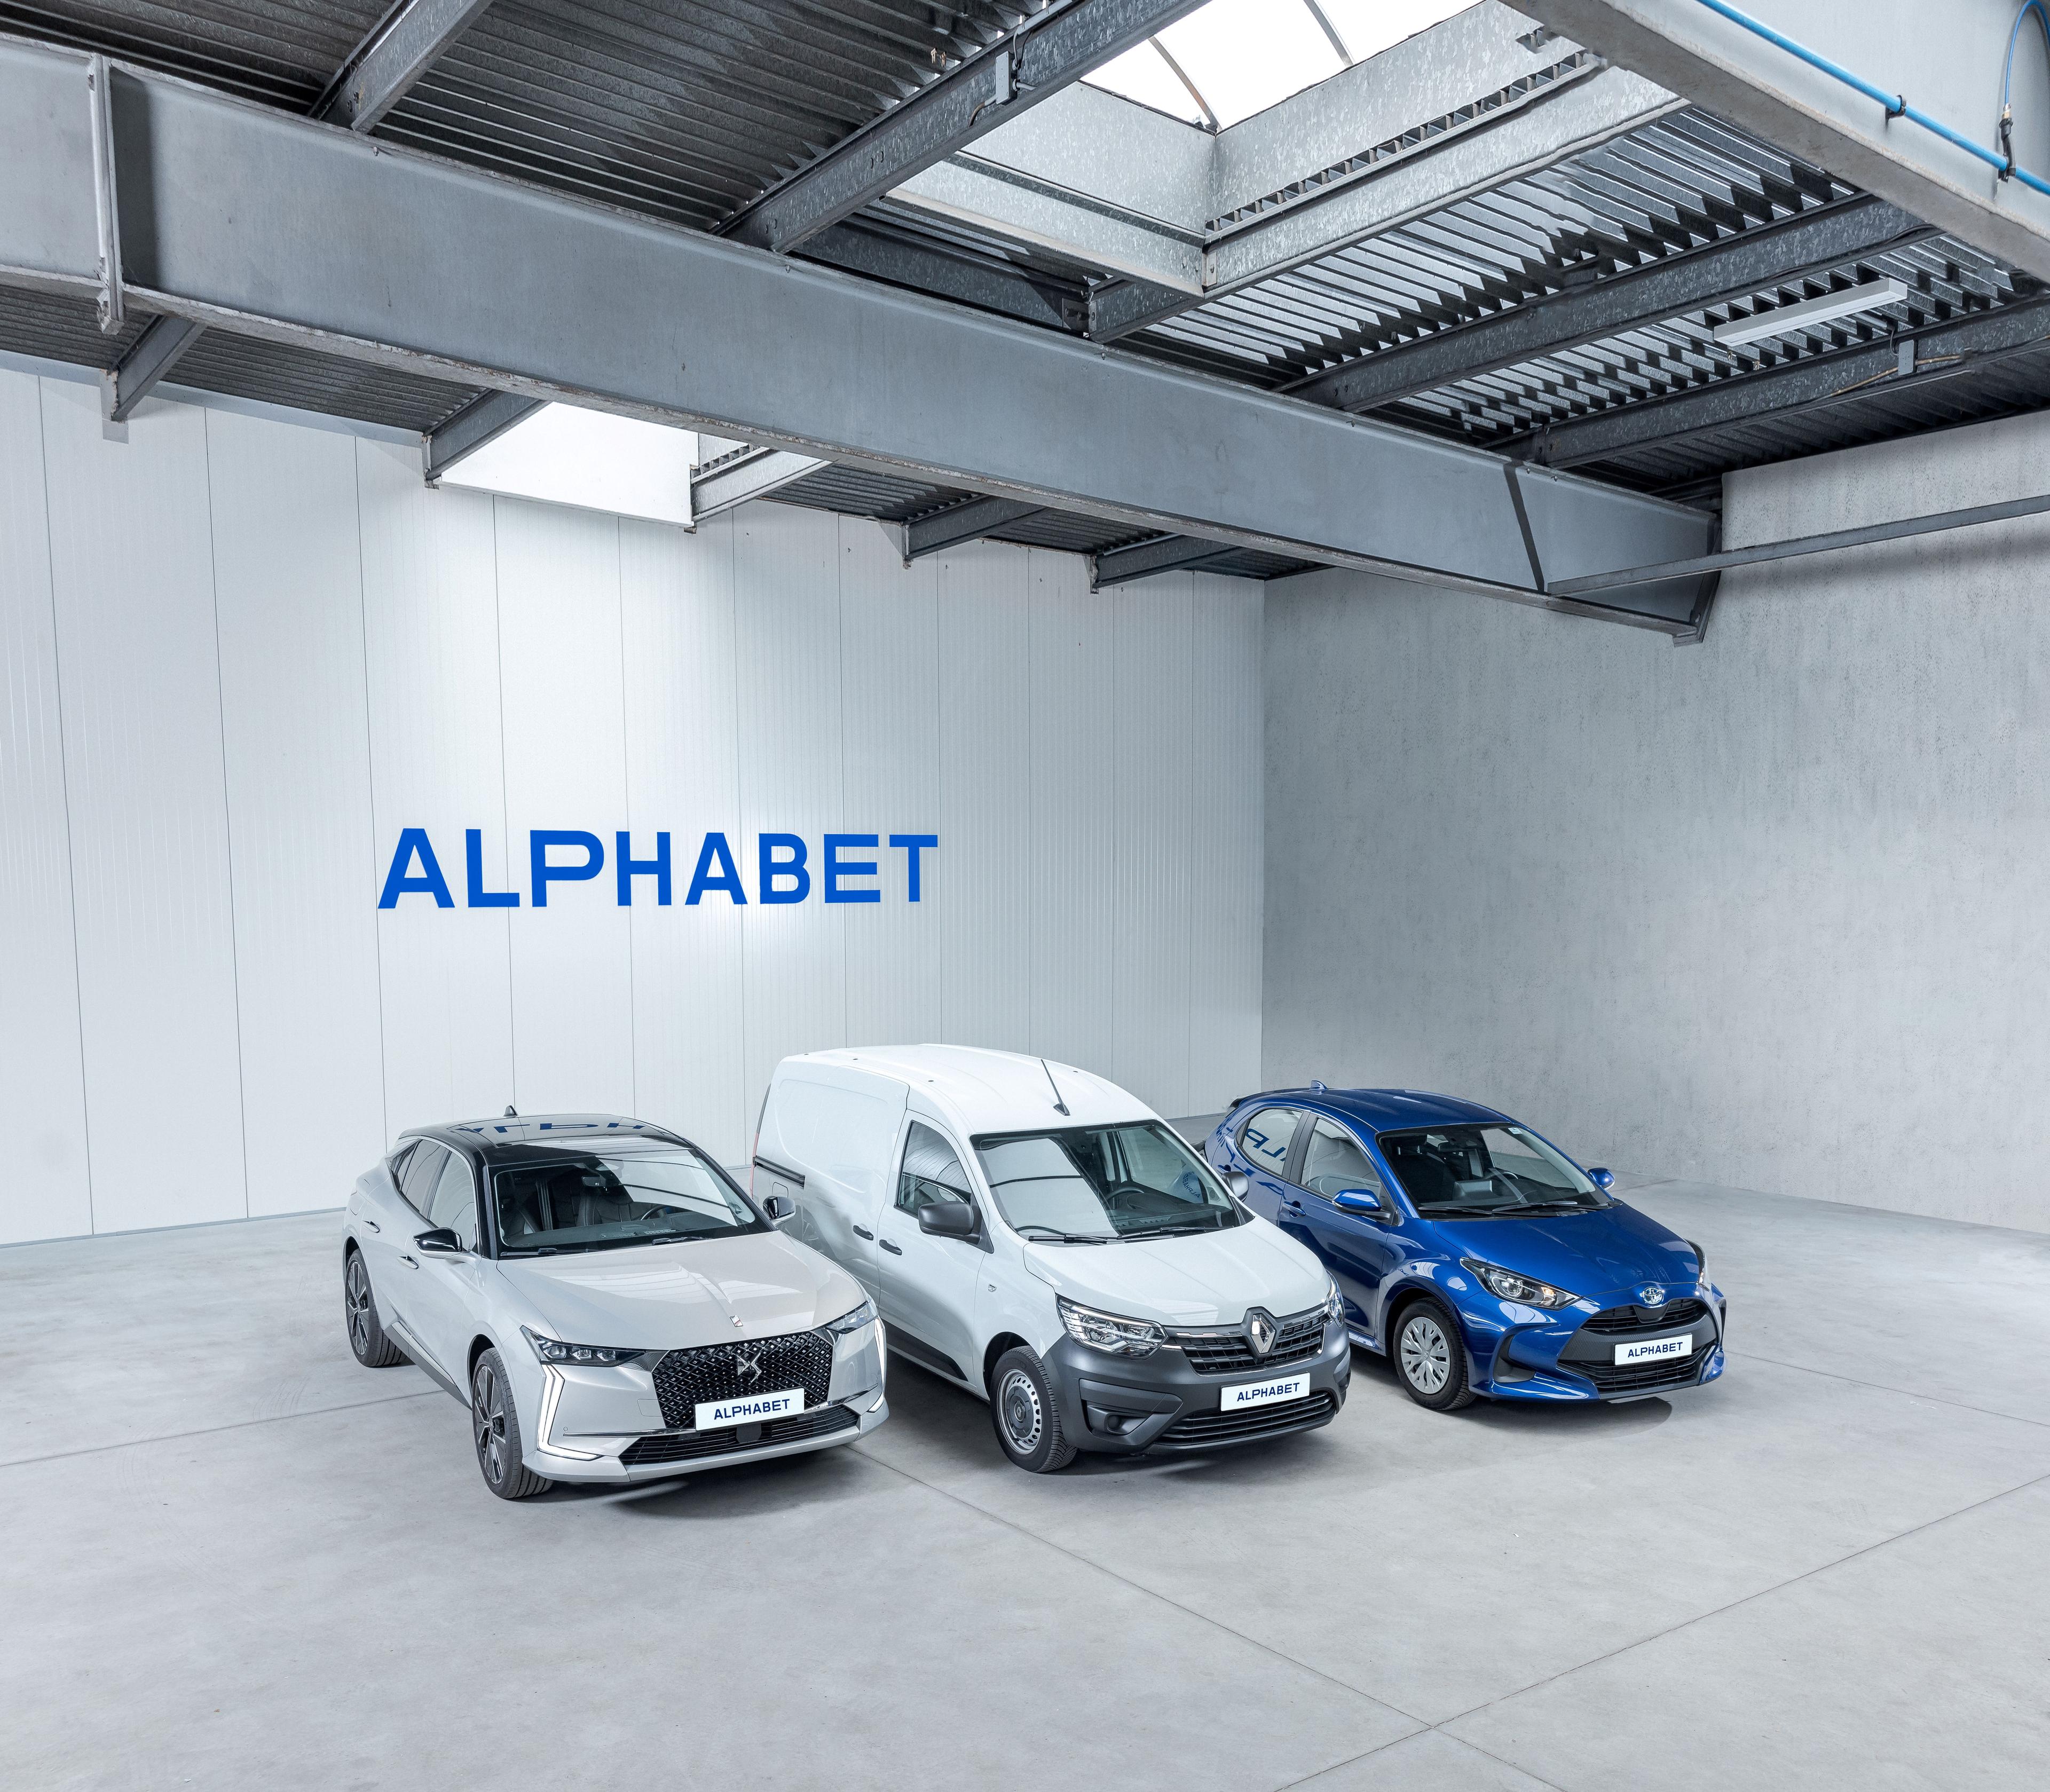 Three vehicles, two cars and a van, lined up against an Alphabet logo backdrop